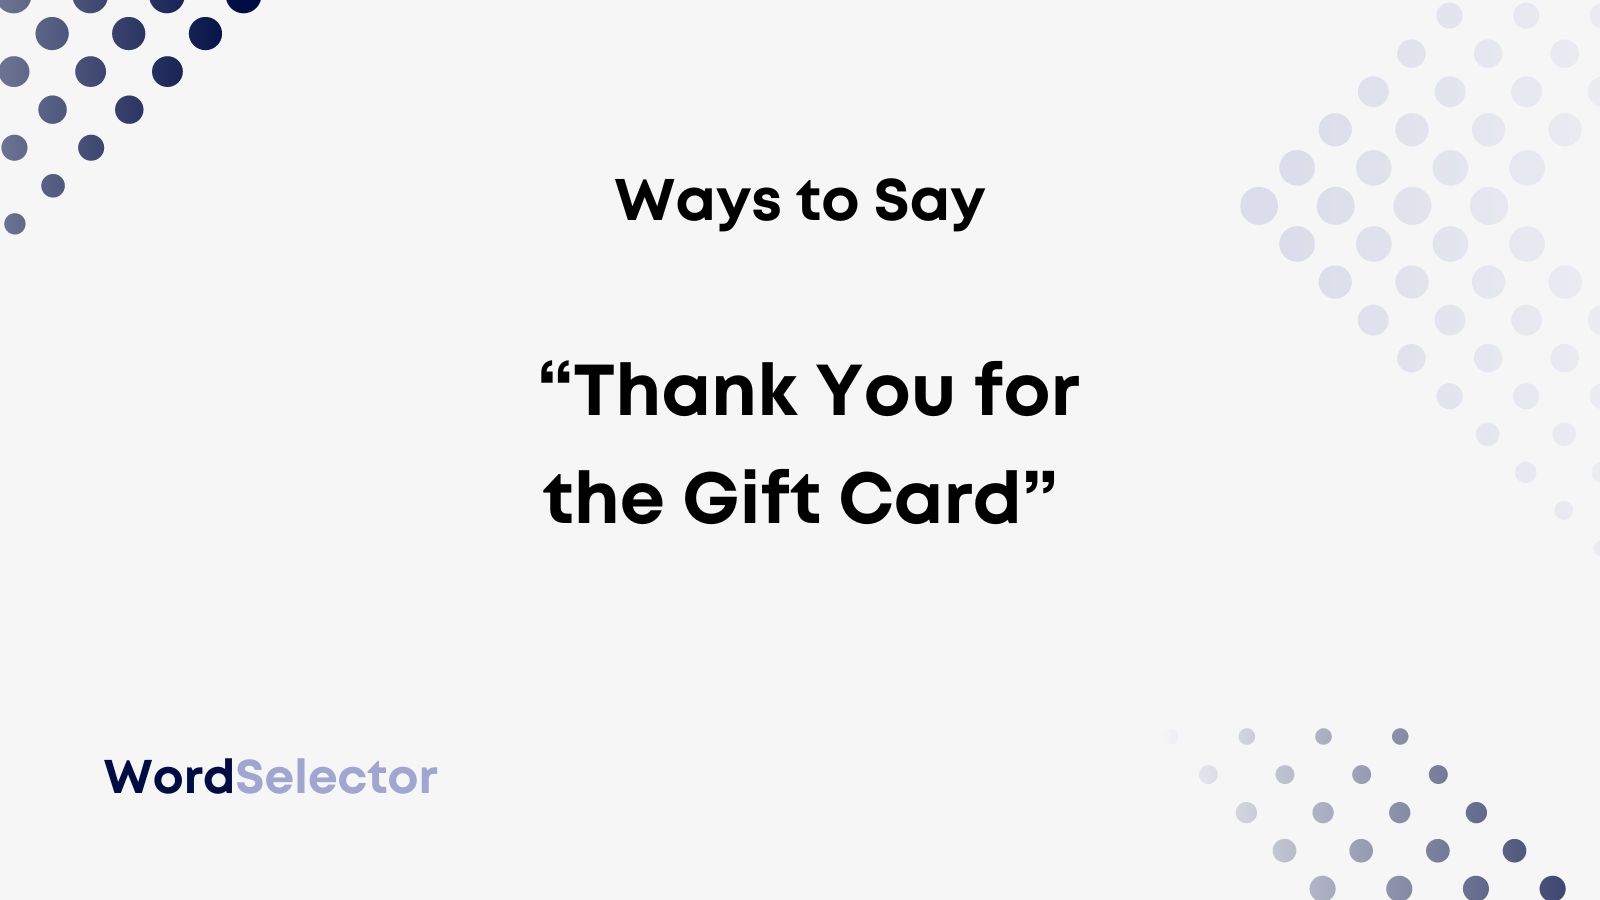 8-ways-to-say-thank-you-for-the-gift-card-wordselector